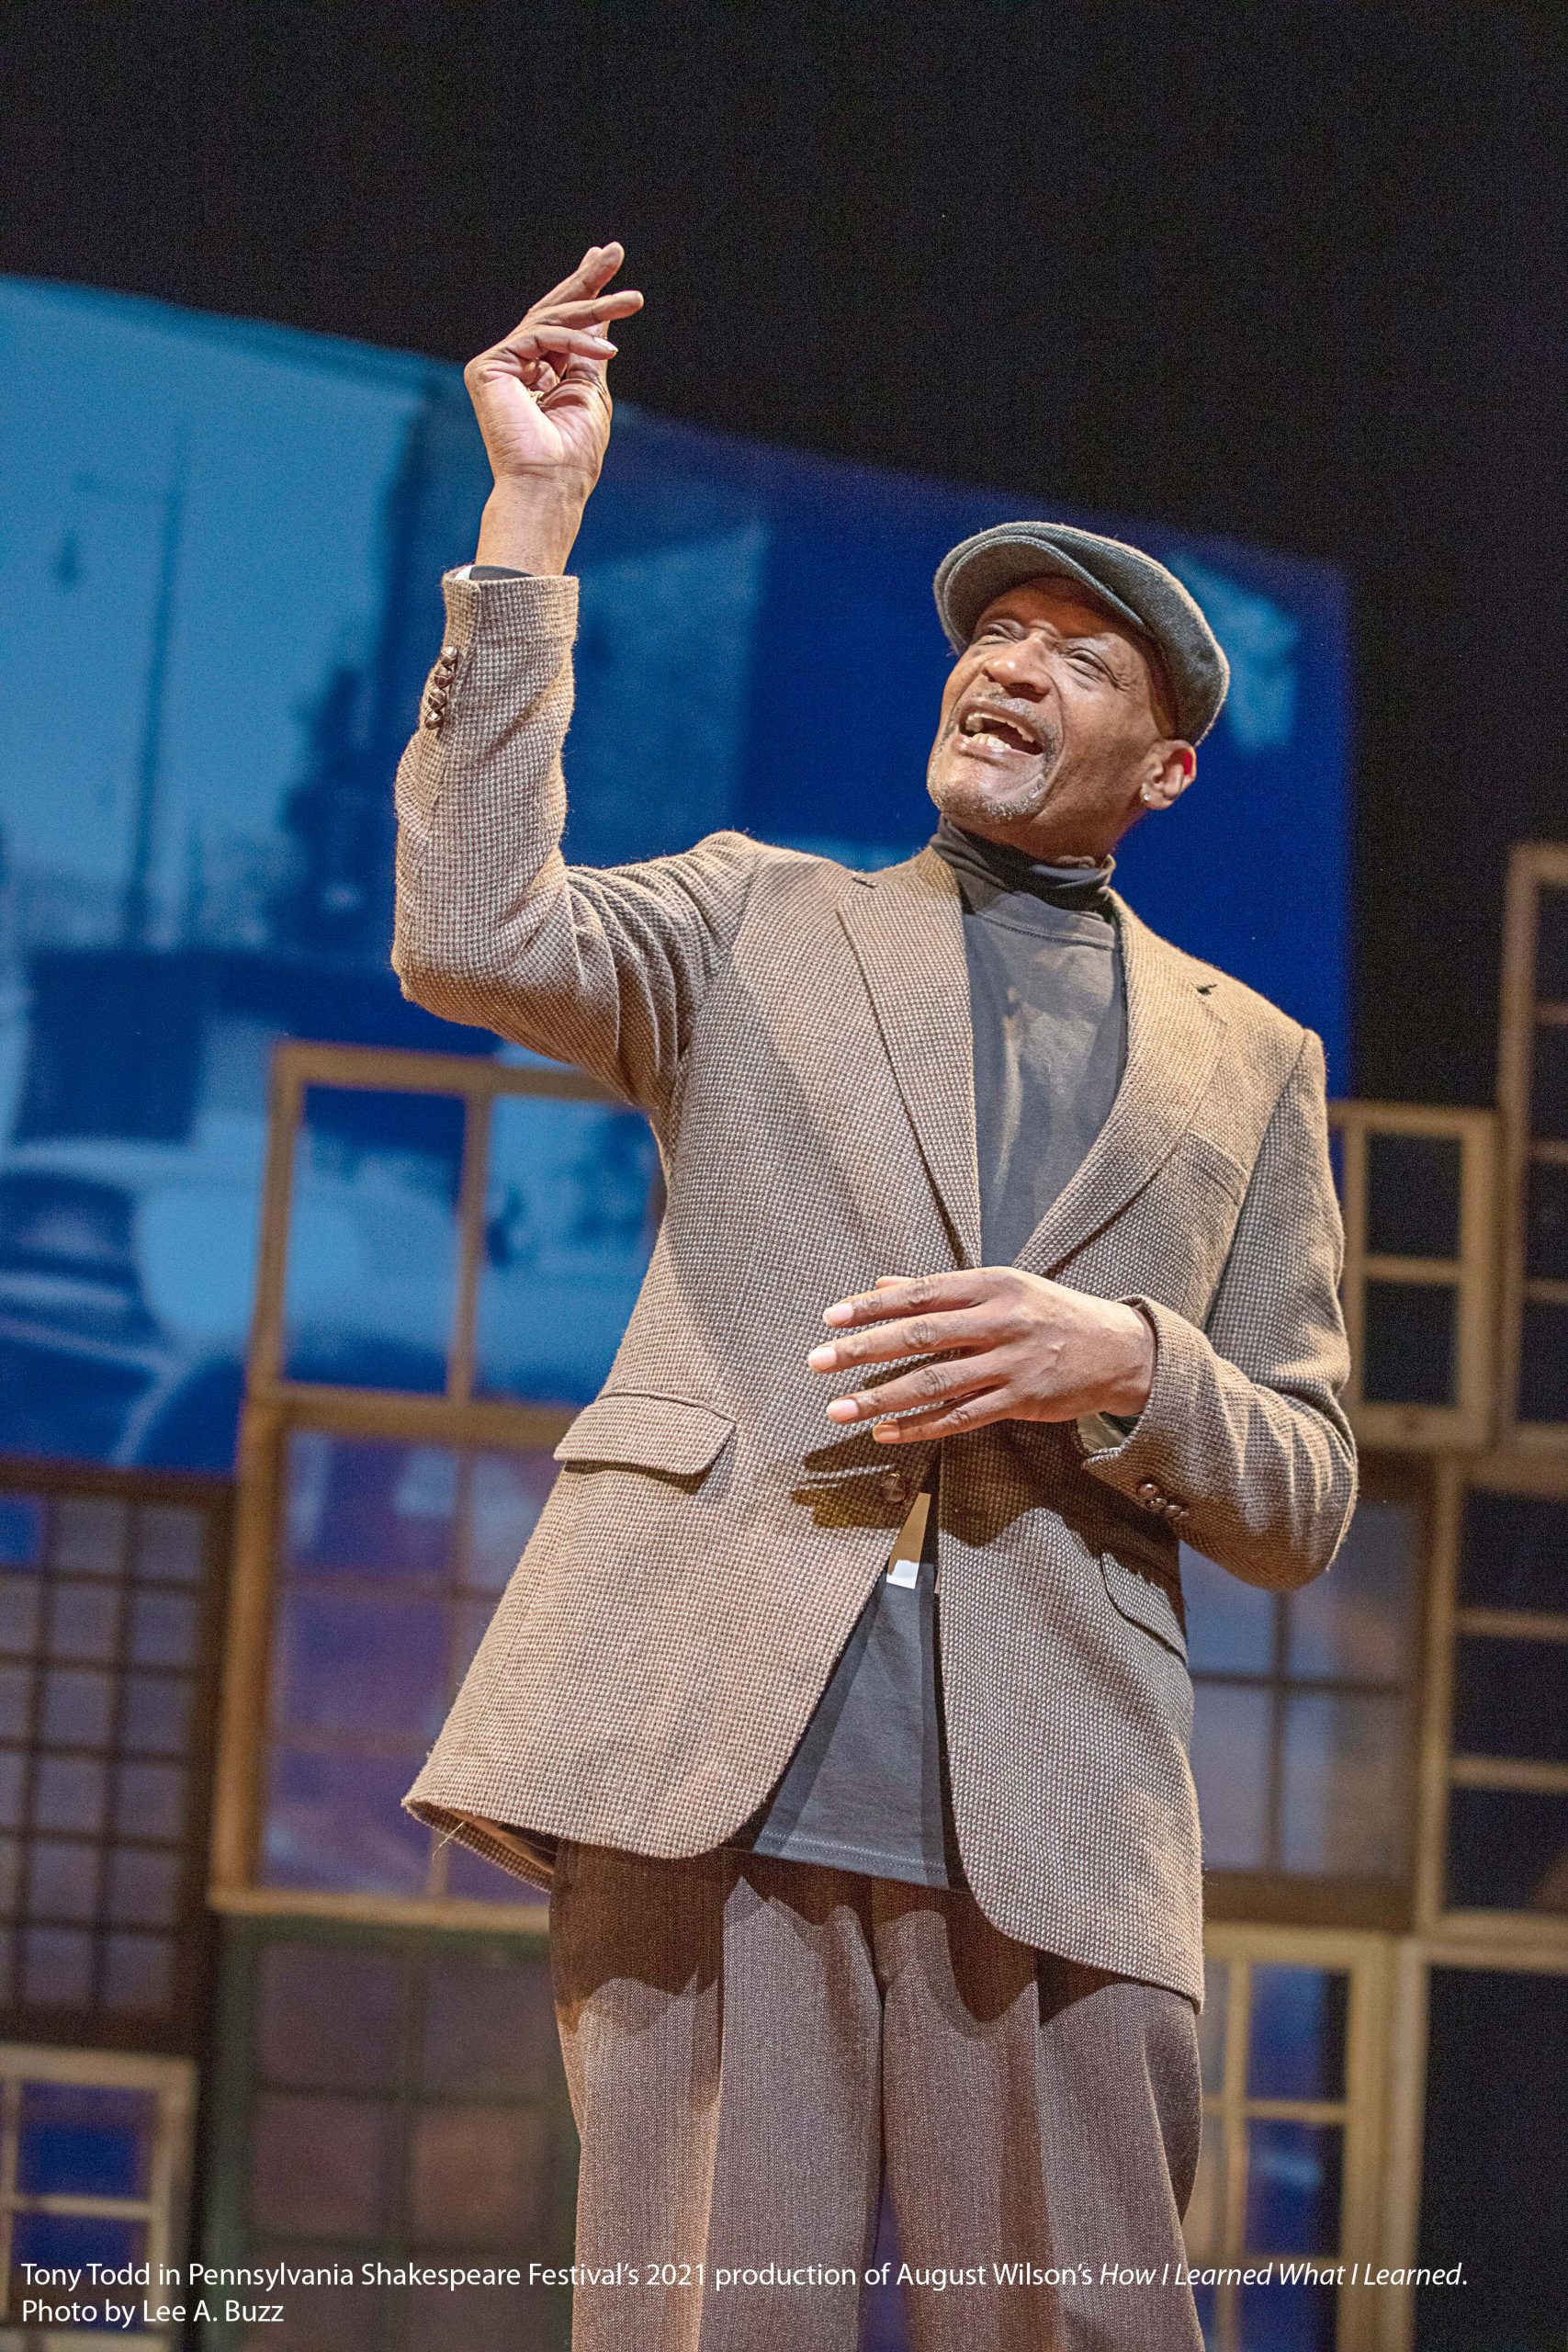 INTERVIEW: Genre Vet Tony Todd Talks His Career and Returning to Theater